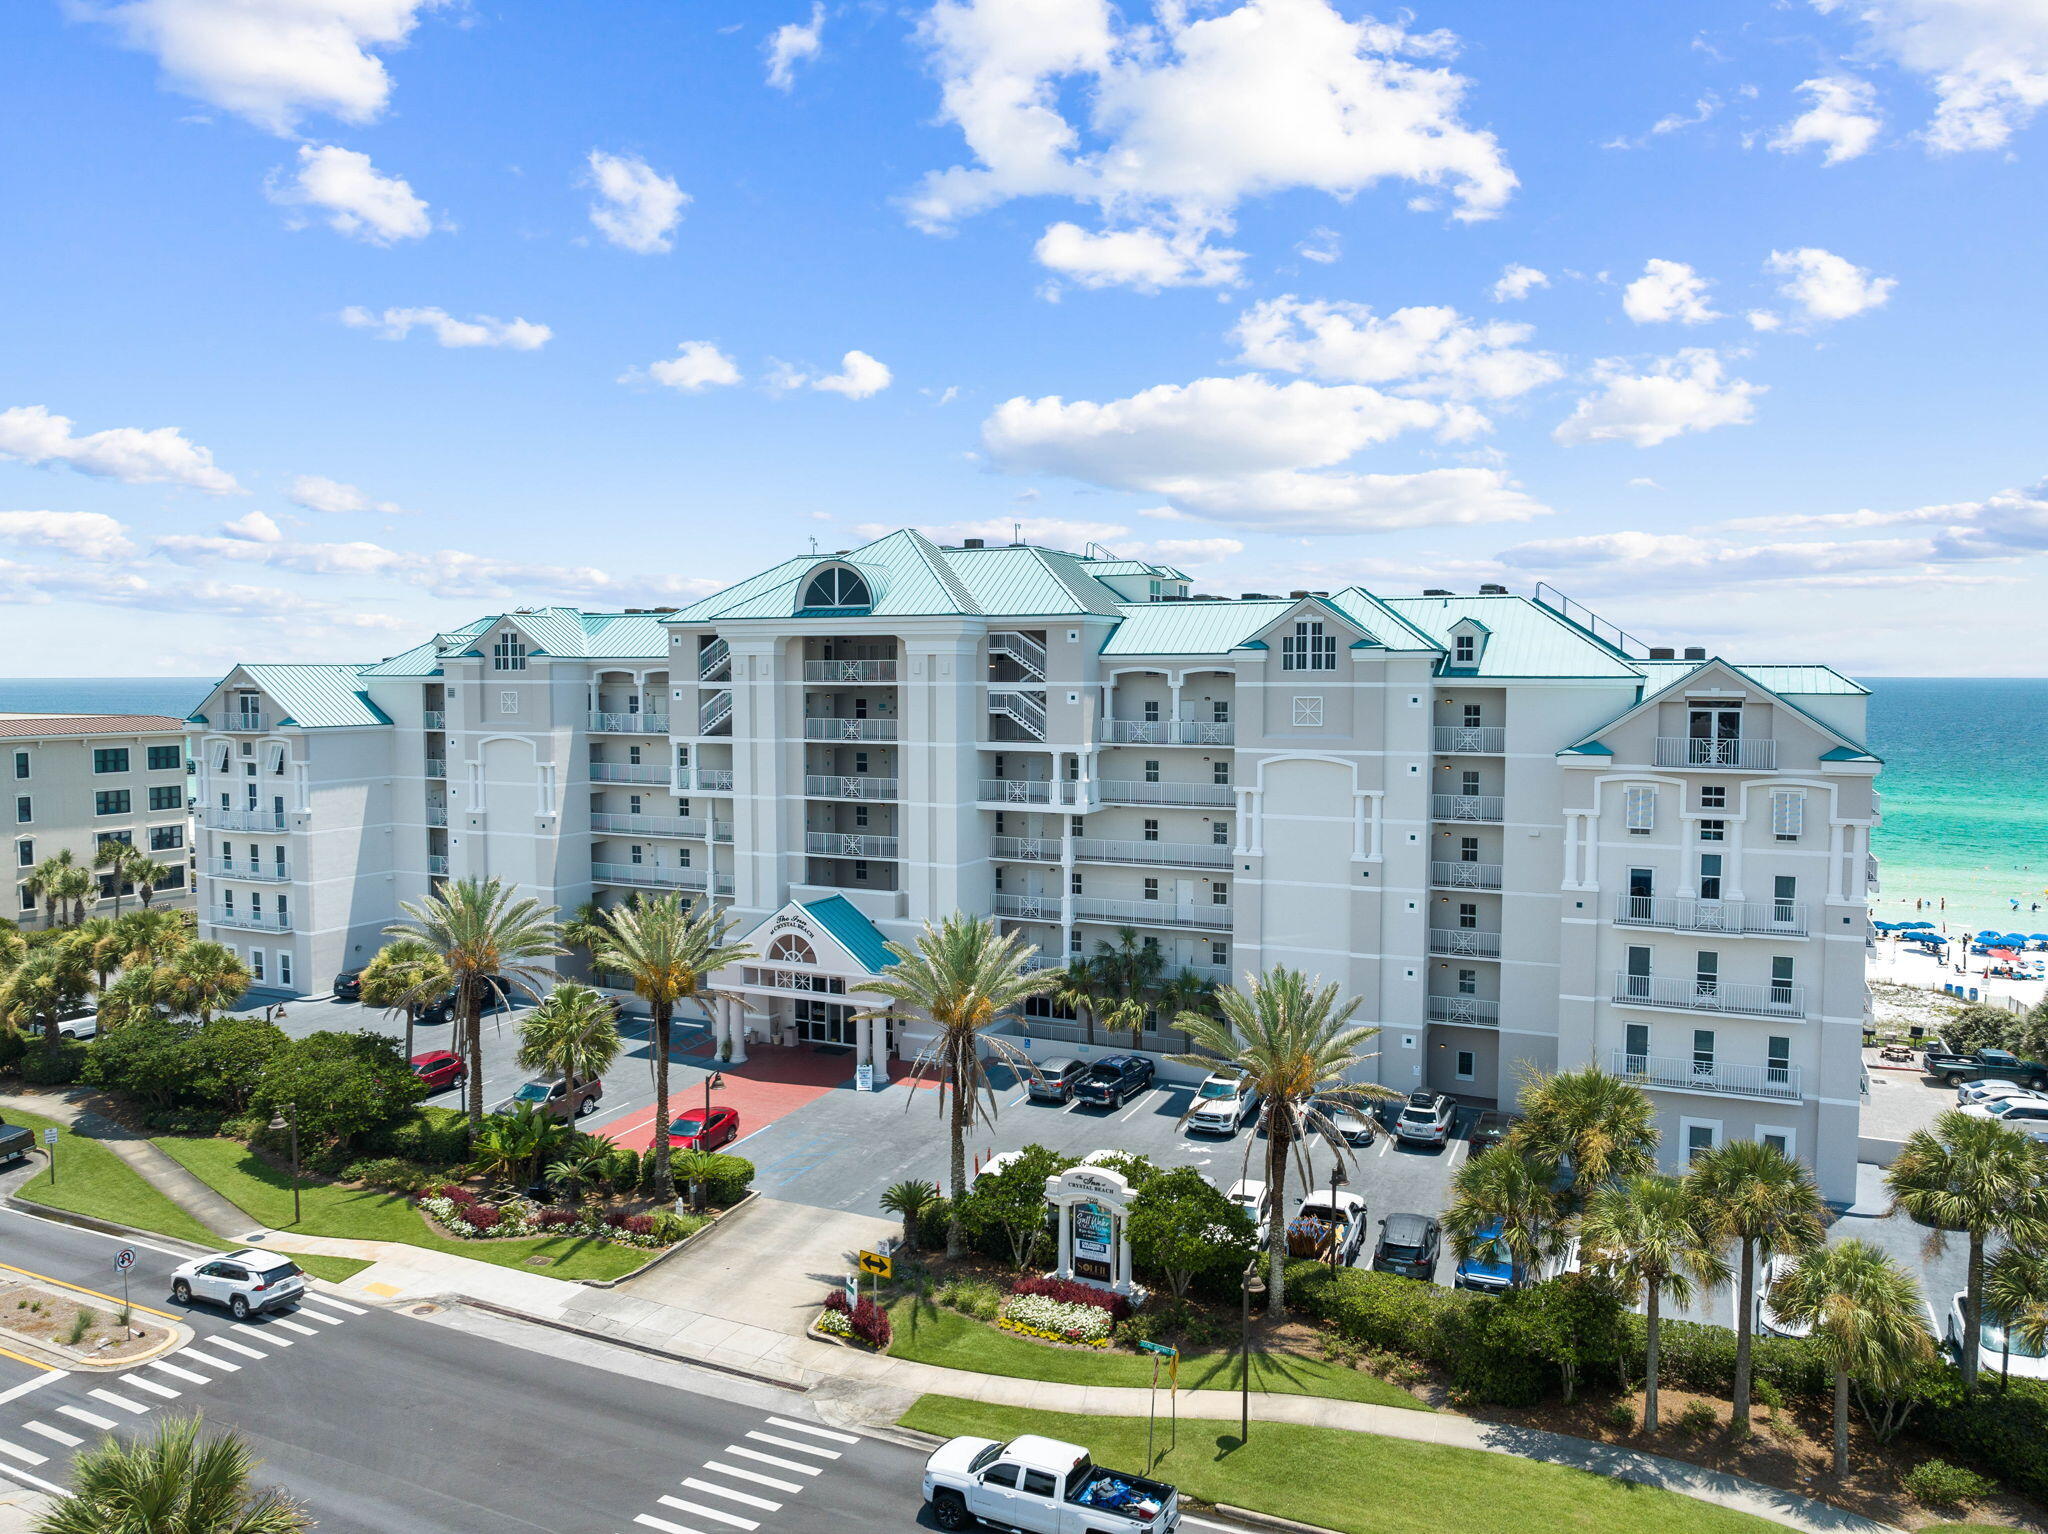 2996 Scenic Hwy 98 UNIT 501, Destin, Florida, 32541, United States, 6 Bedrooms Bedrooms, ,4 BathroomsBathrooms,Residential,For Sale,2996 Scenic Hwy 98 UNIT 501,1492290